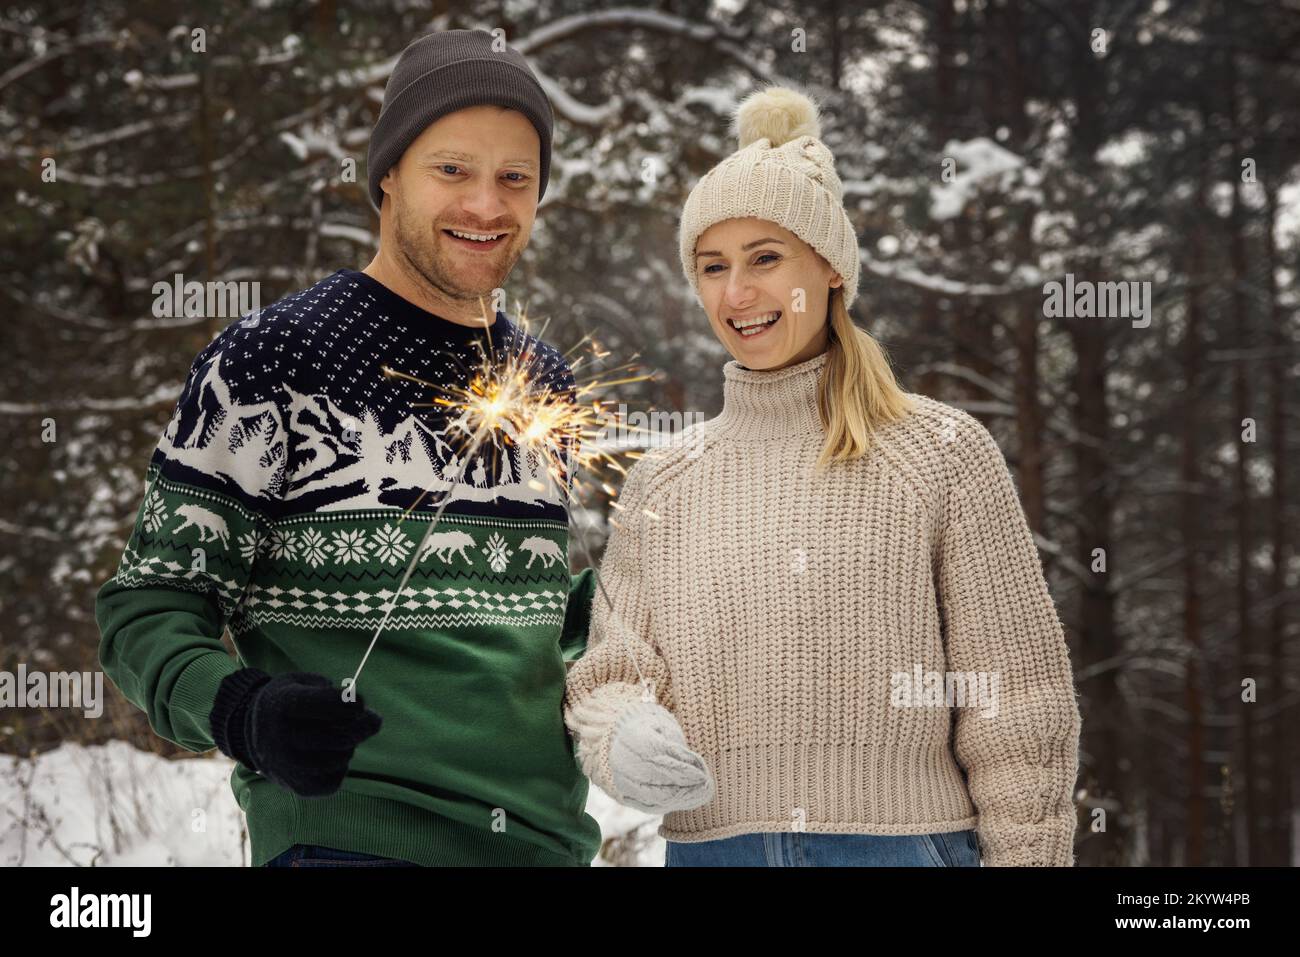 smiling couple with sparklers outdoors in snowy winter forest. people with burning bengal lights Stock Photo